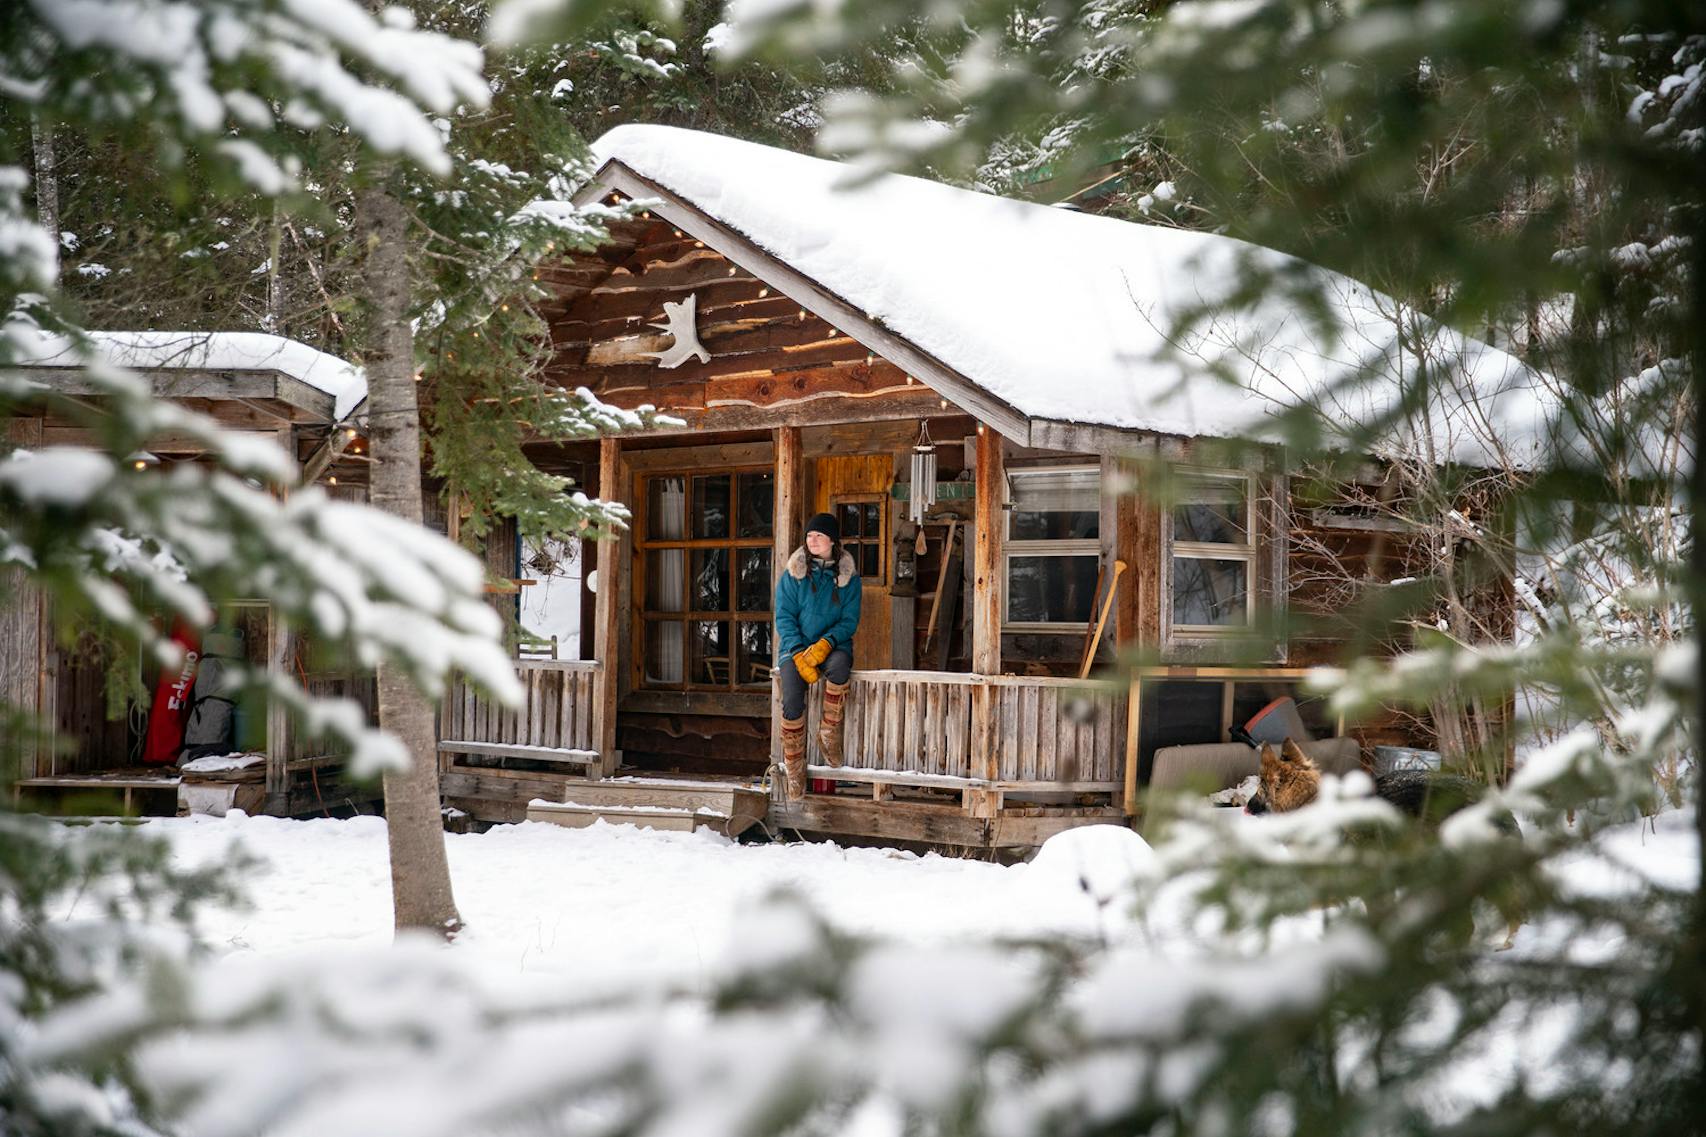 Ashley Bredemus has settled into the 200-square-foot “Pepper Shack” (built by her mom and dad in the 1980s) on the grounds of Birchwood Wilderness Camp for Boys.